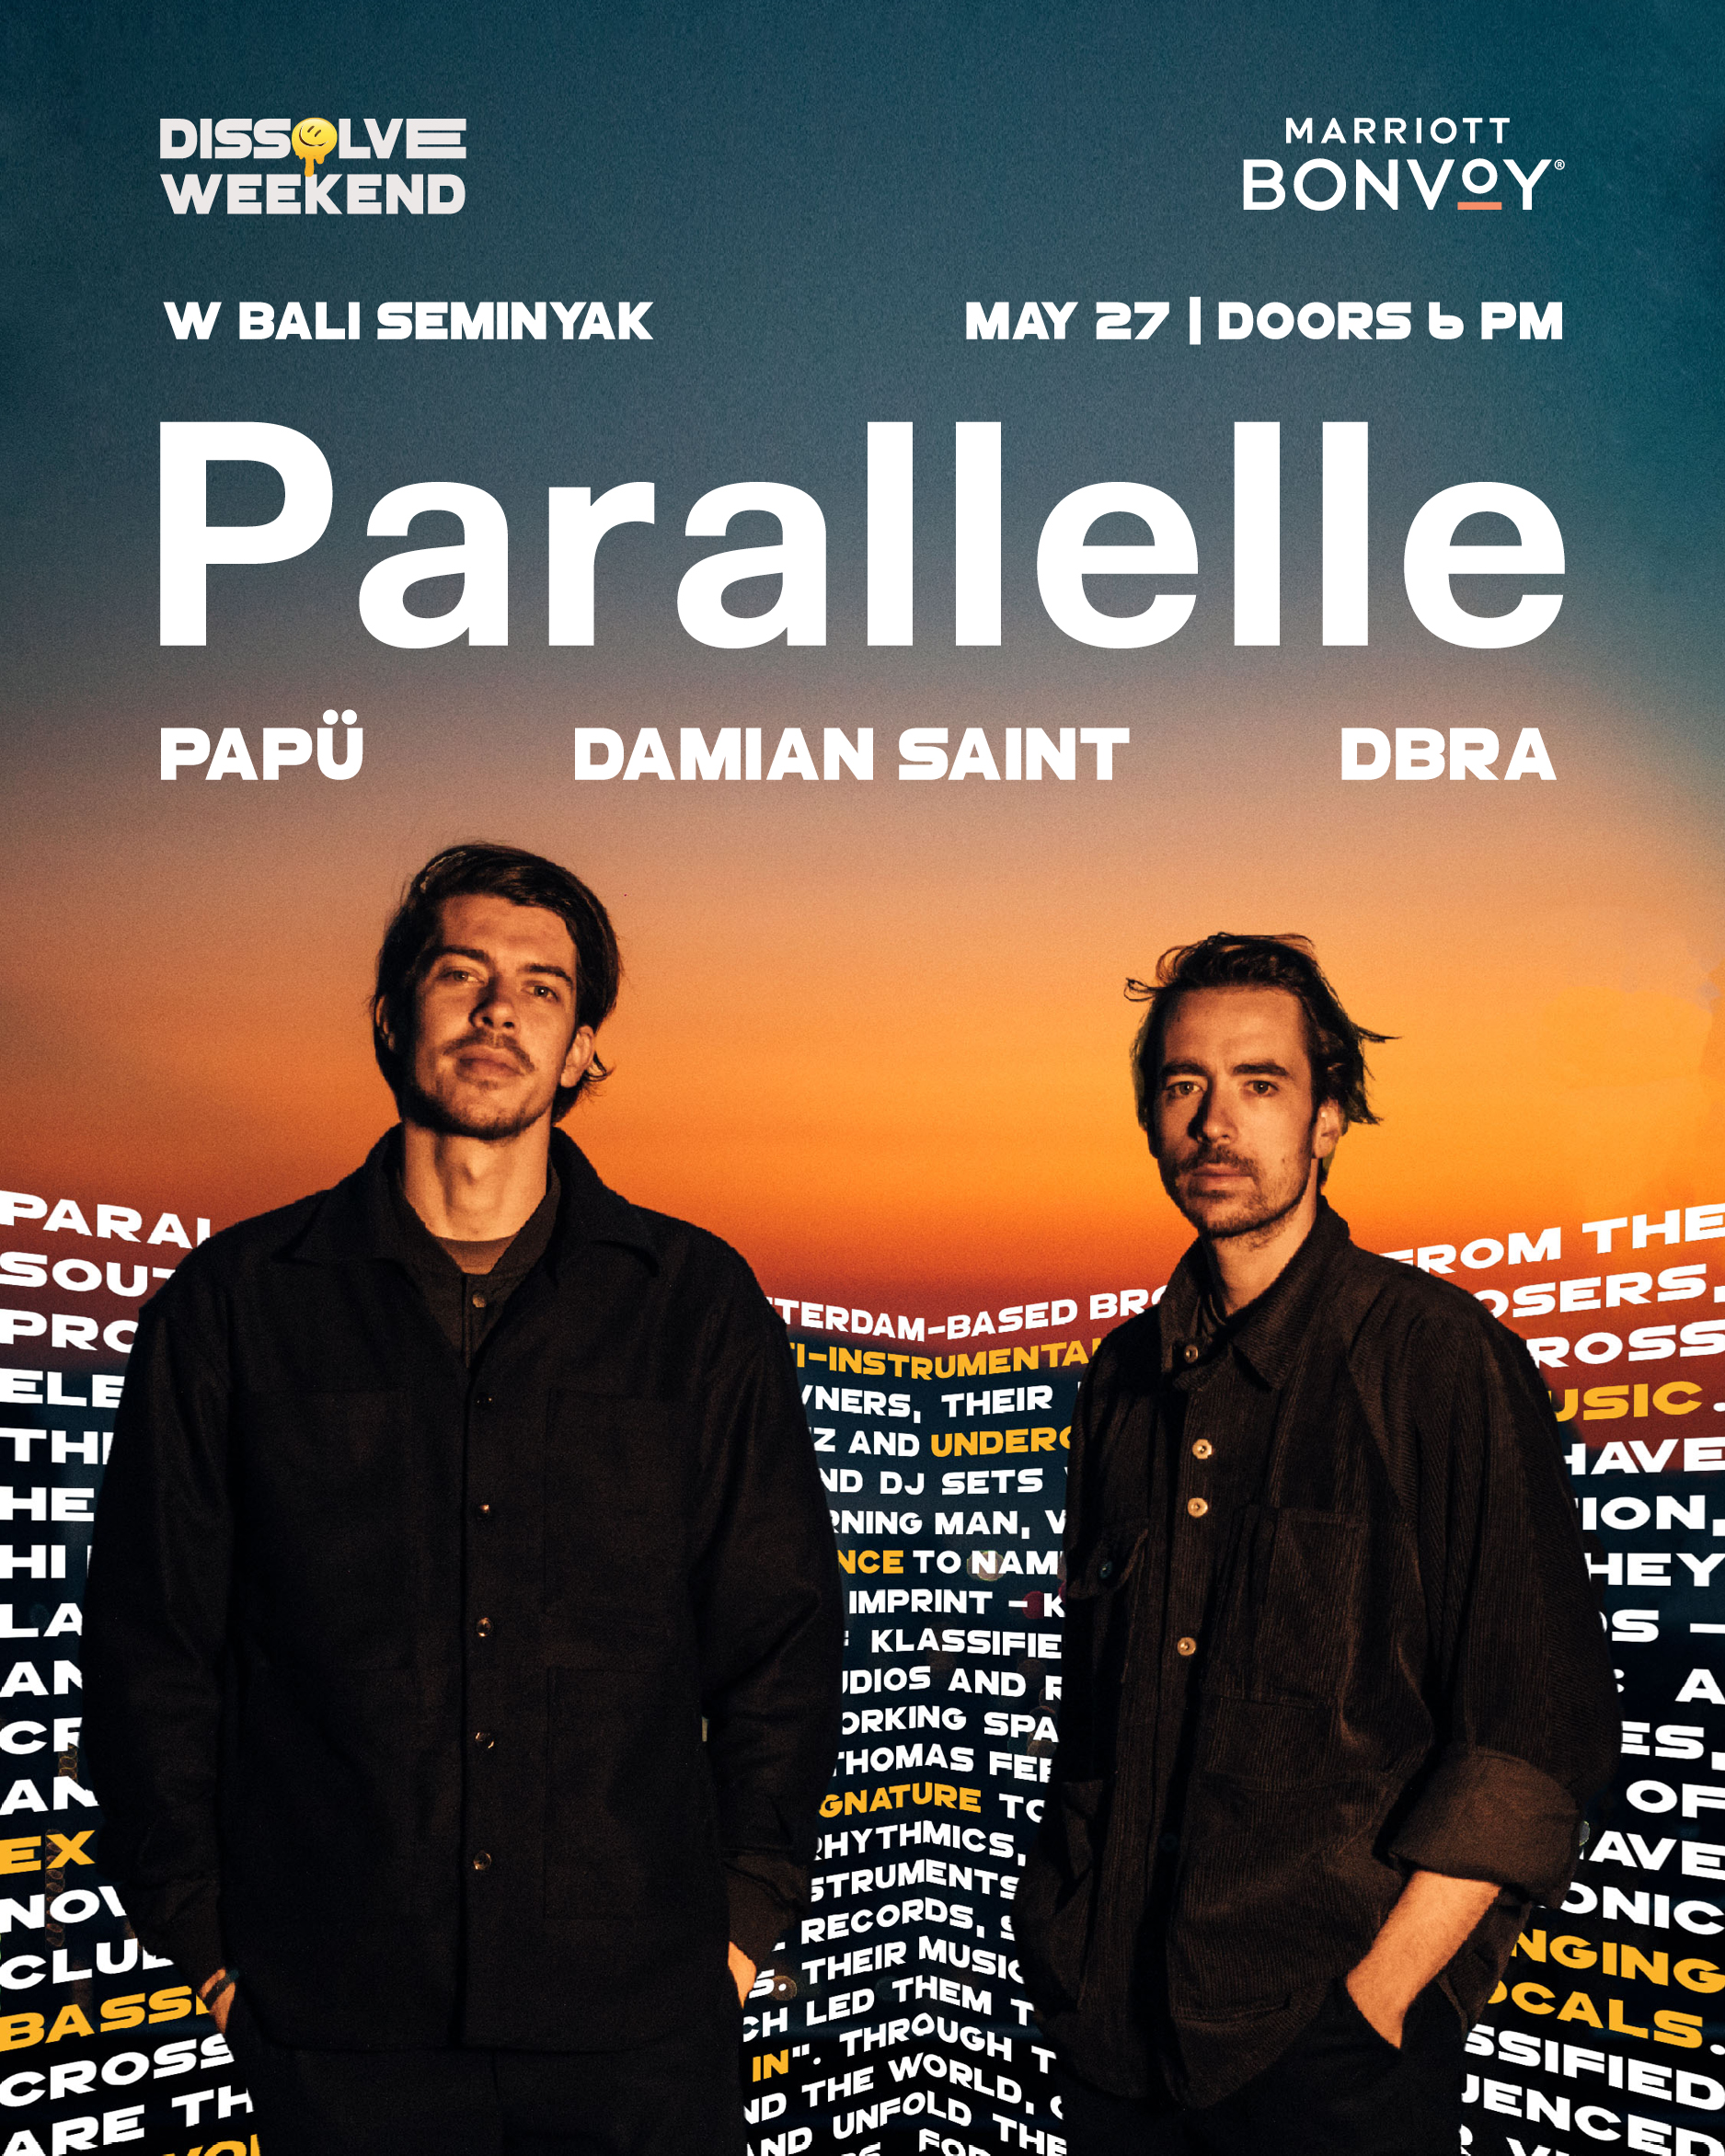 DISSOLVE WEEKEND AT W BALI FT PARALLELLE – SATURDAY MAY 27TH thumbnail image